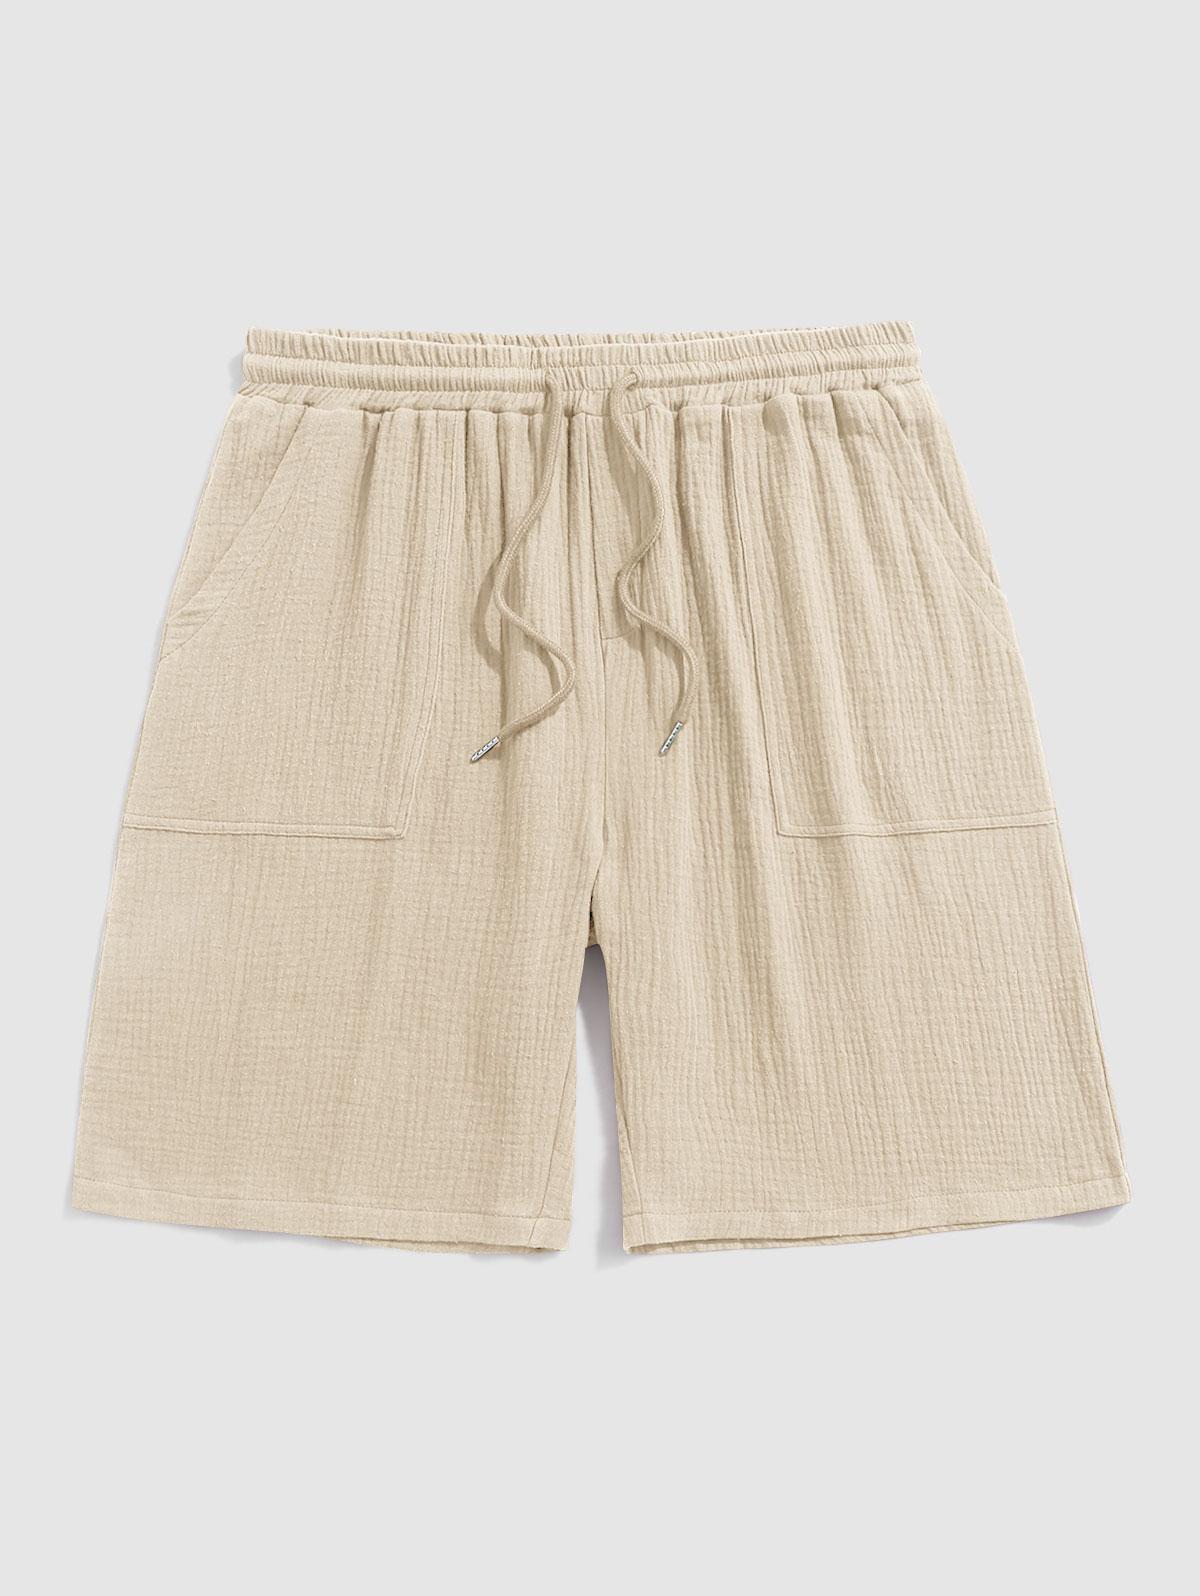 ZAFUL Solid Color Soft Textured Basic Drawstring Shorts S Light yellow